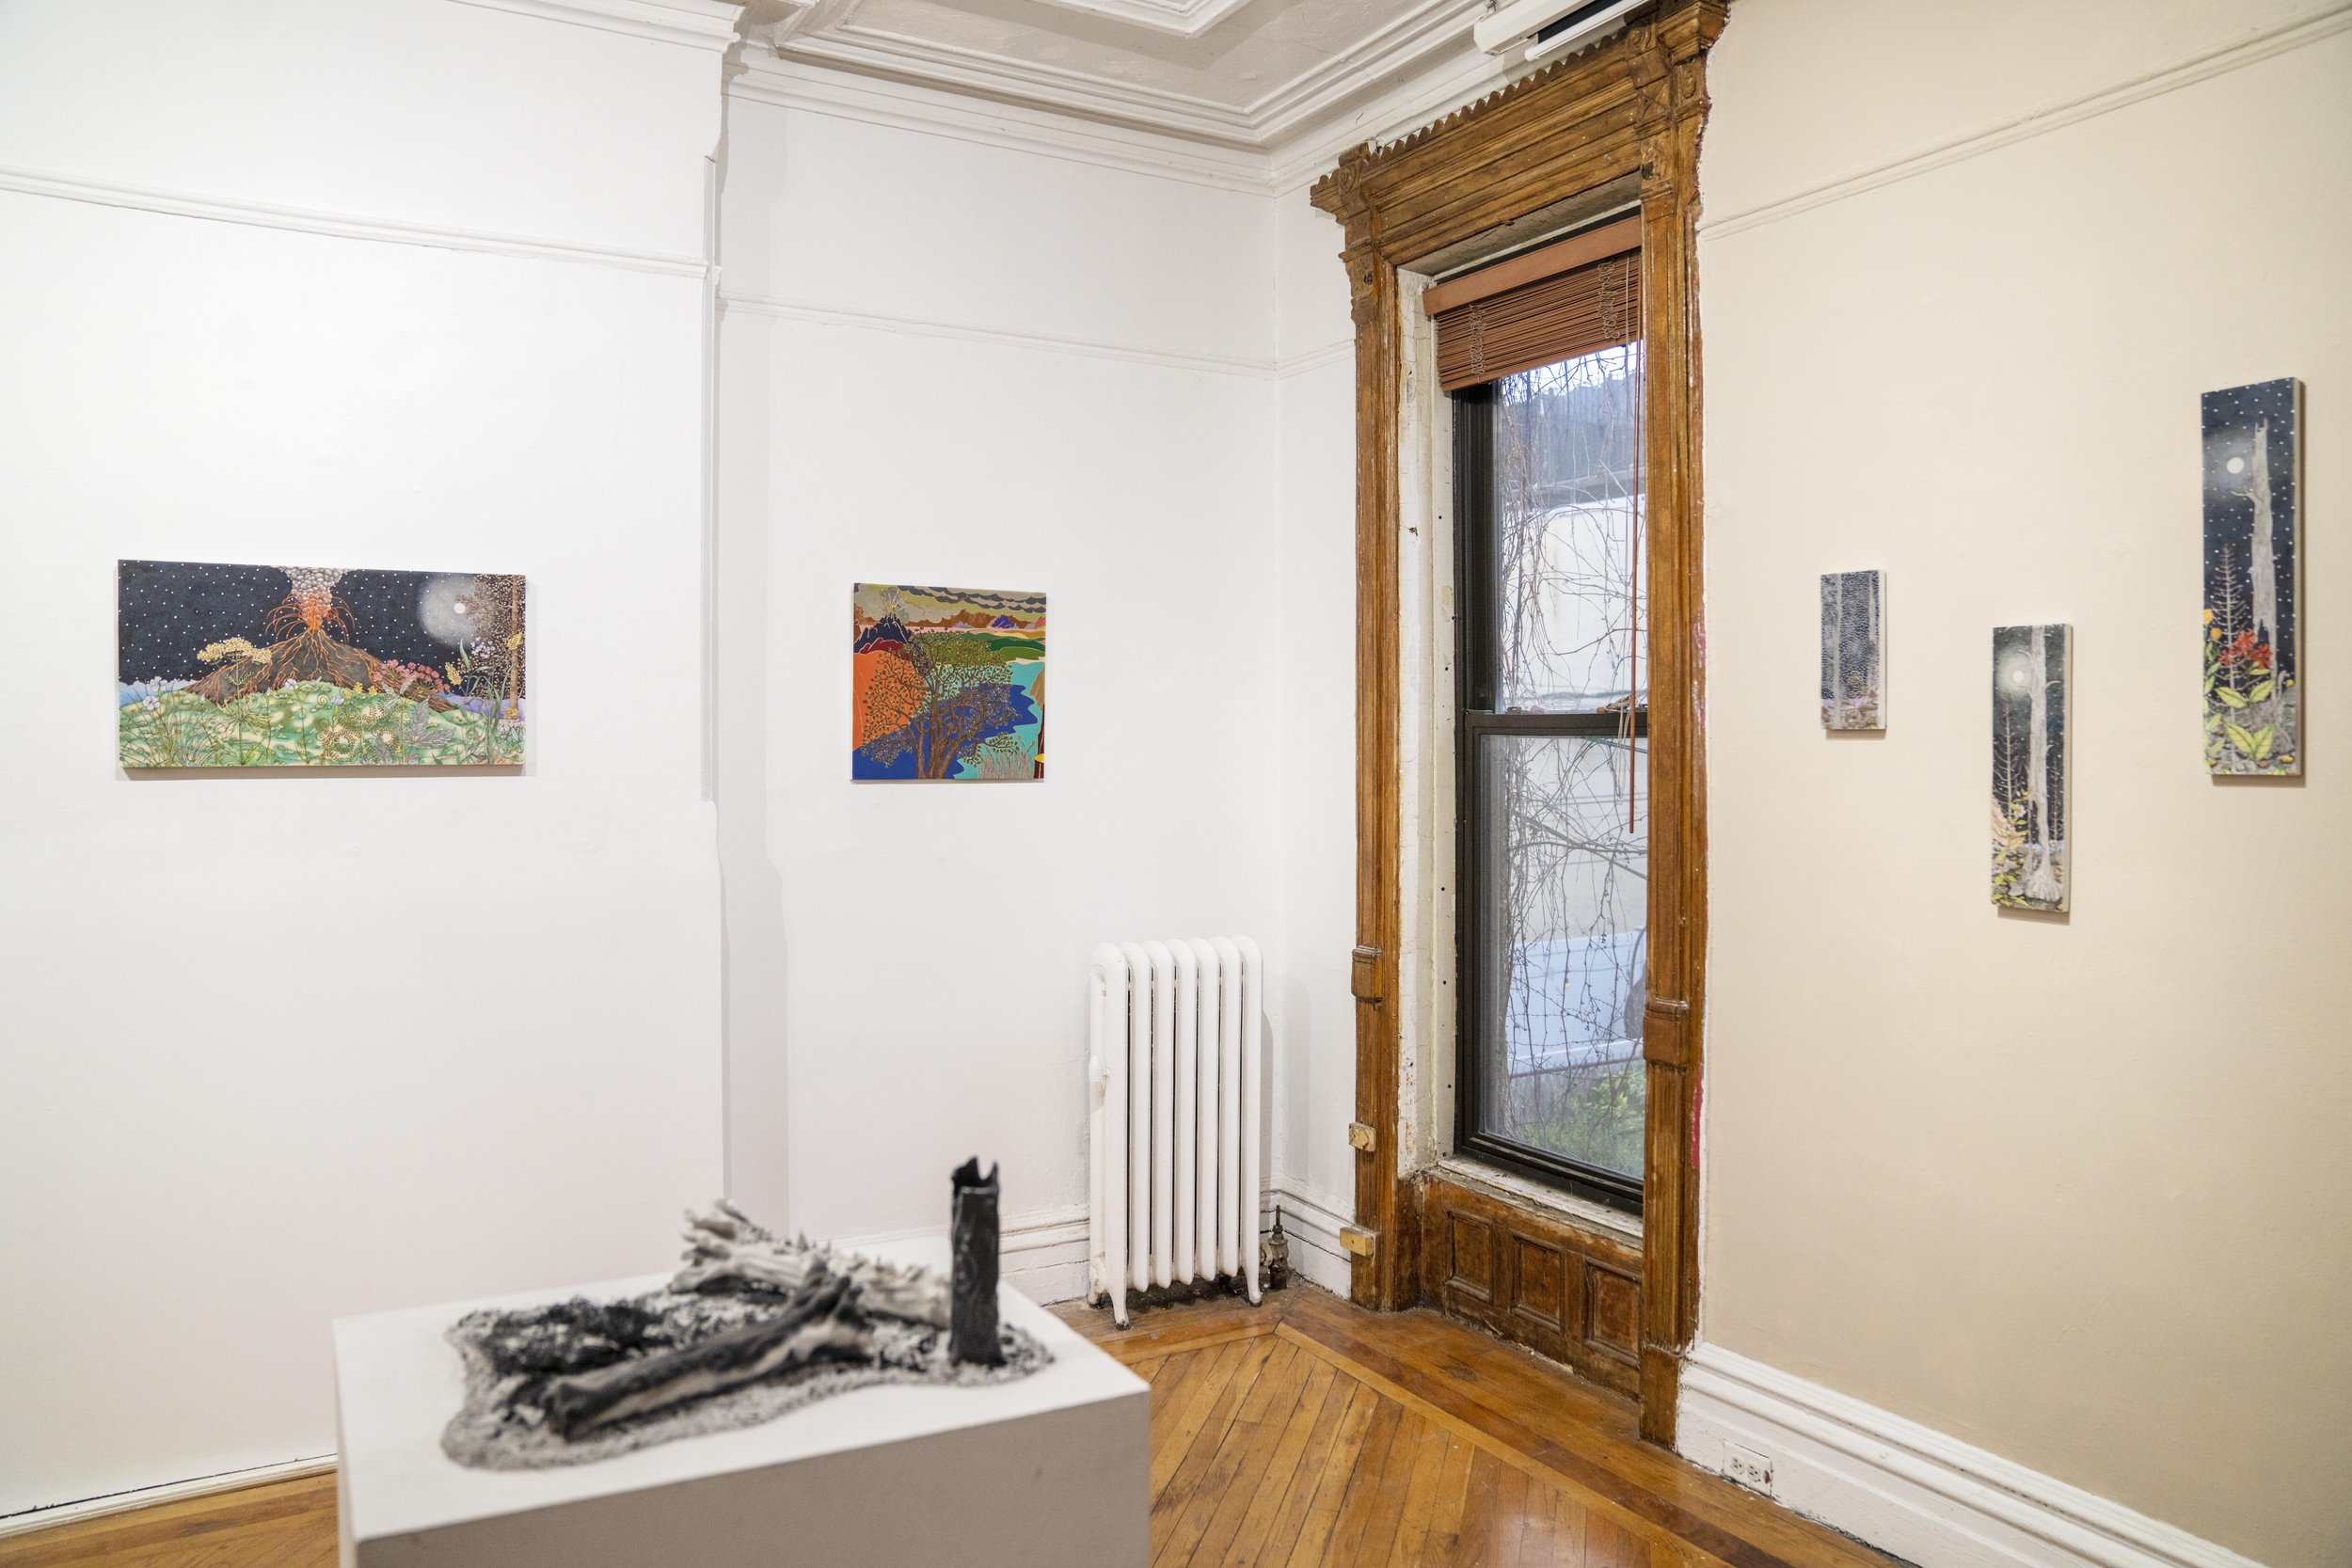  Installation View of Michael Eade: After the Burn. Photo by Joey ZhaoyinWang and Lynn Hai, courtesy of Fou Gallery 